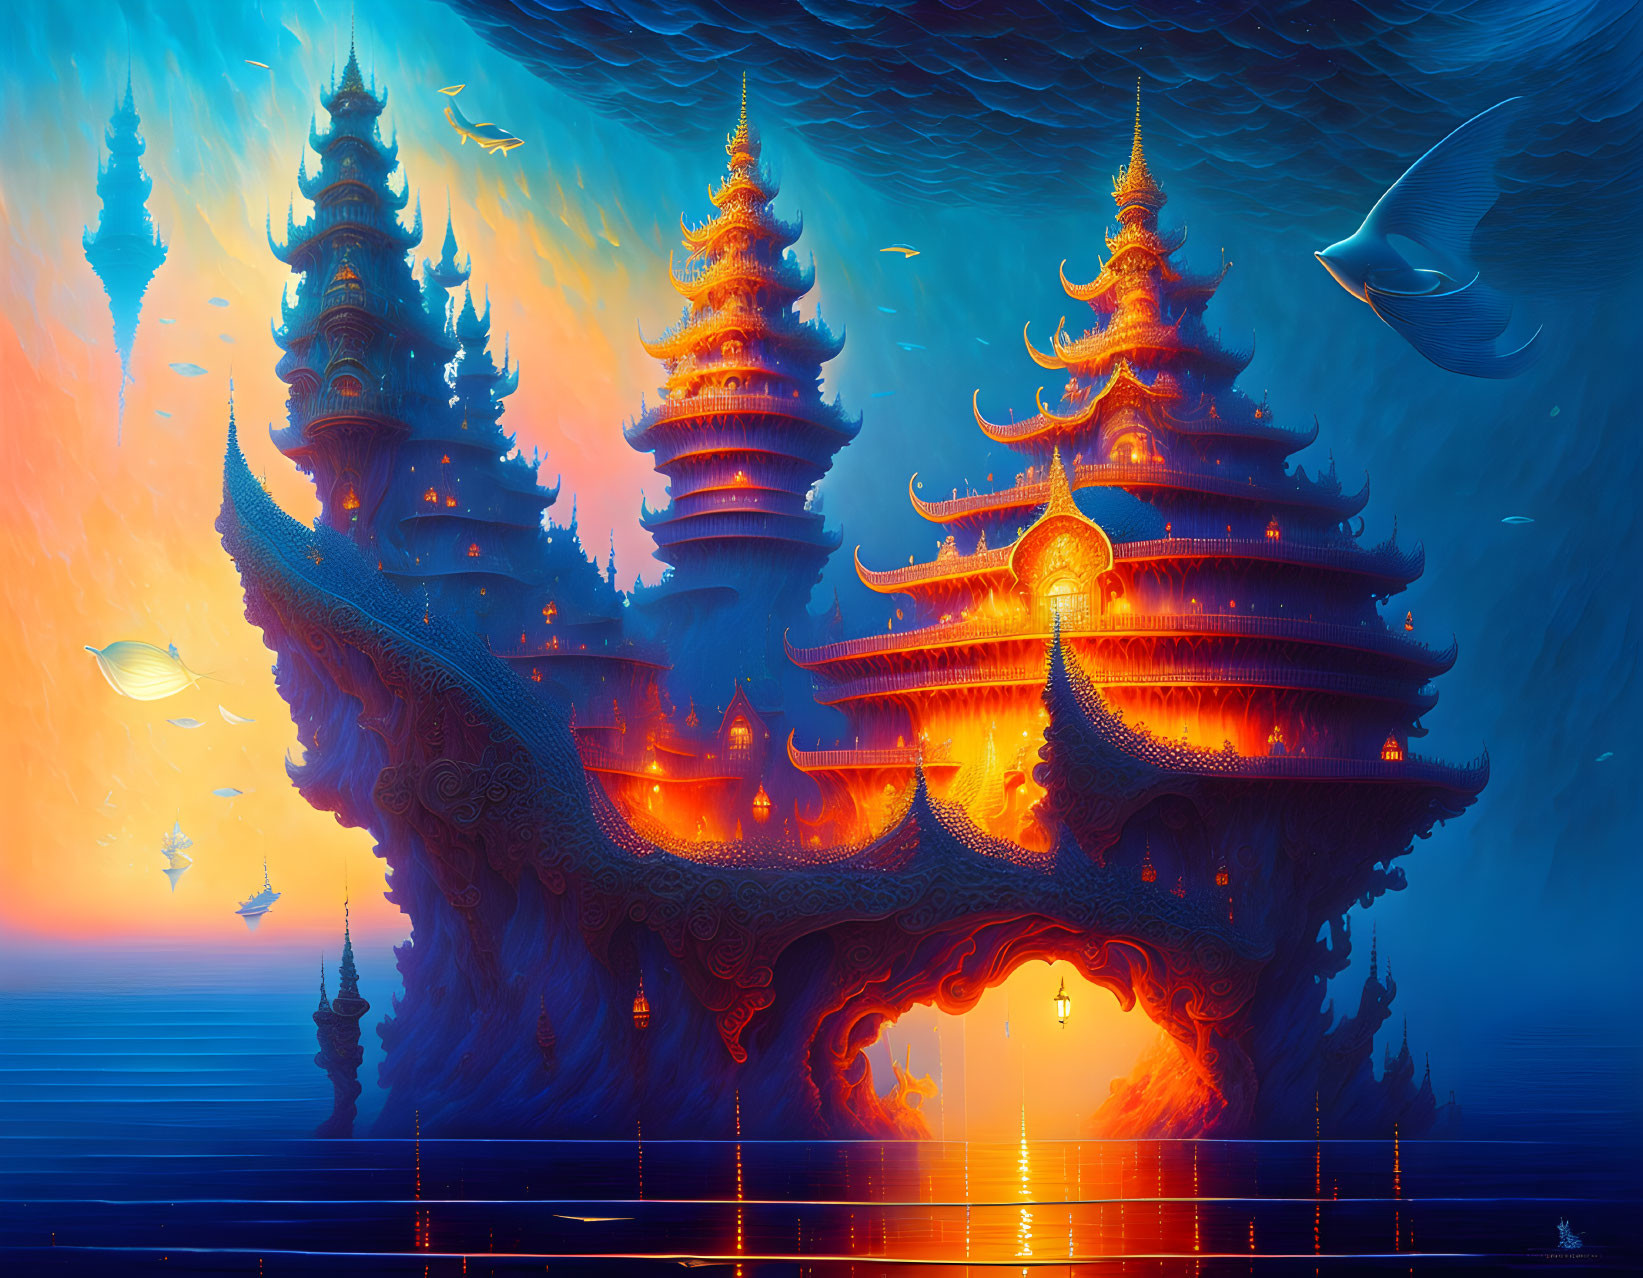 Digital Artwork: Glowing Temples Over Ocean with Sunset and Stingrays